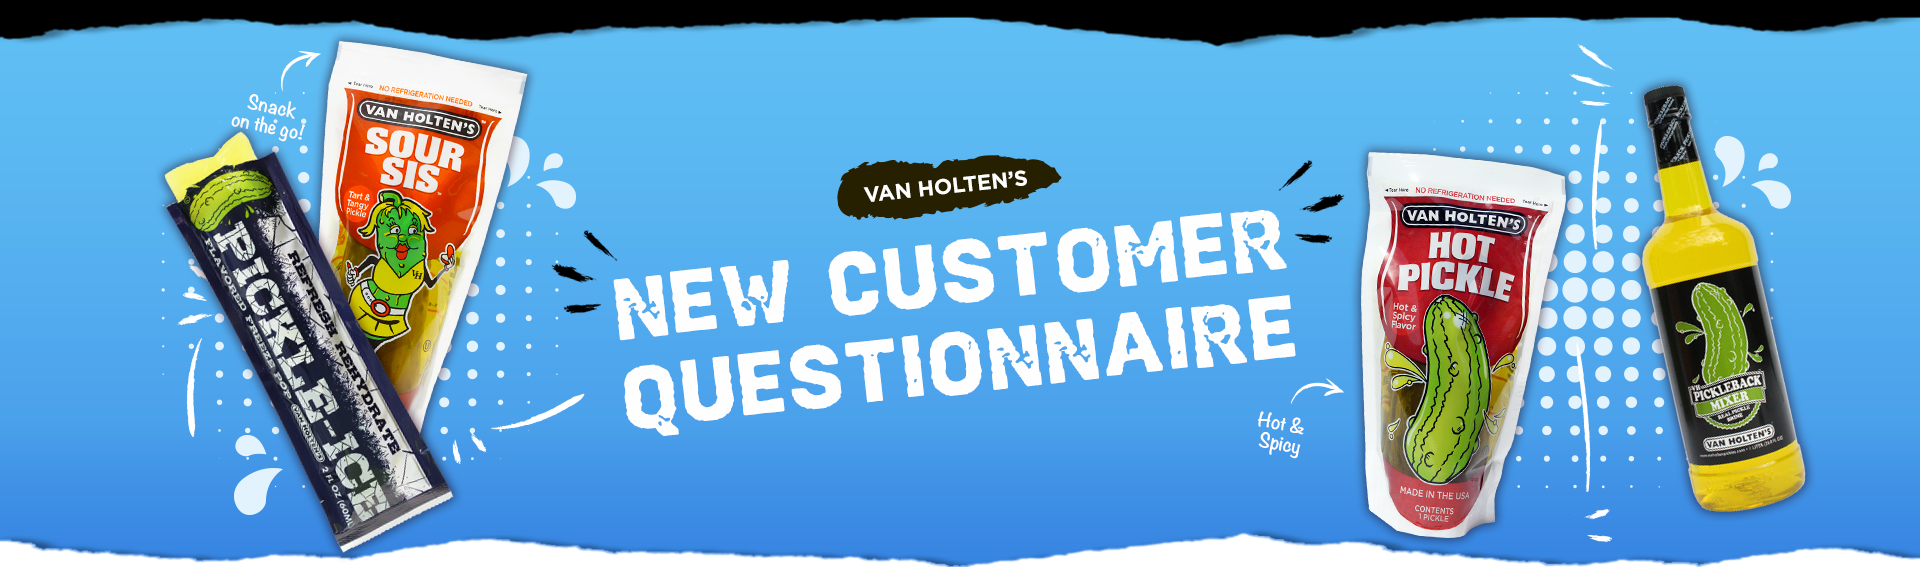 New Customer Questionnaire